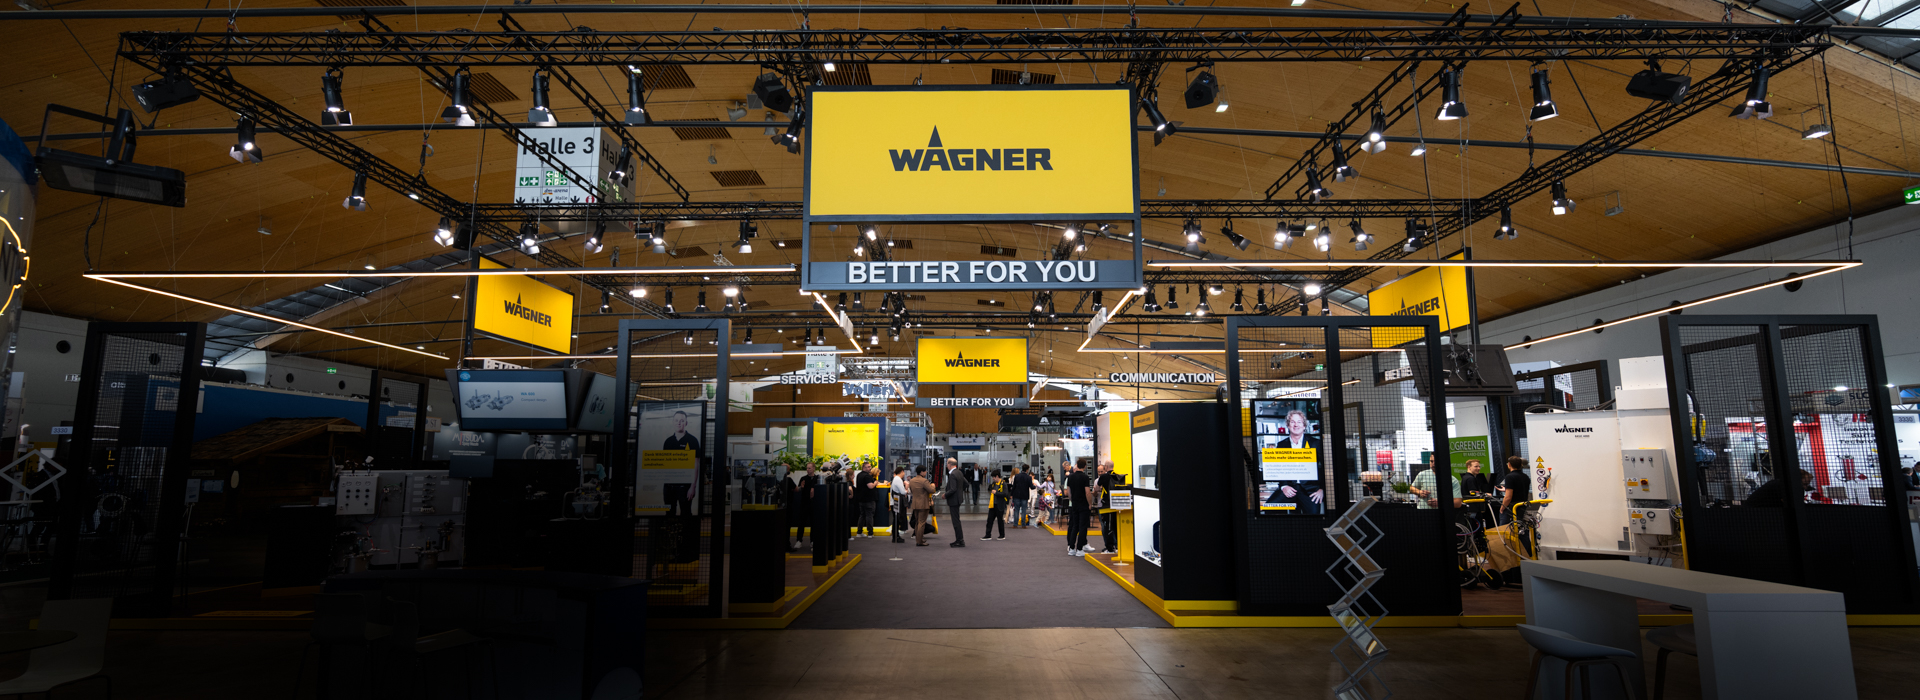 wagner paintexpo stand